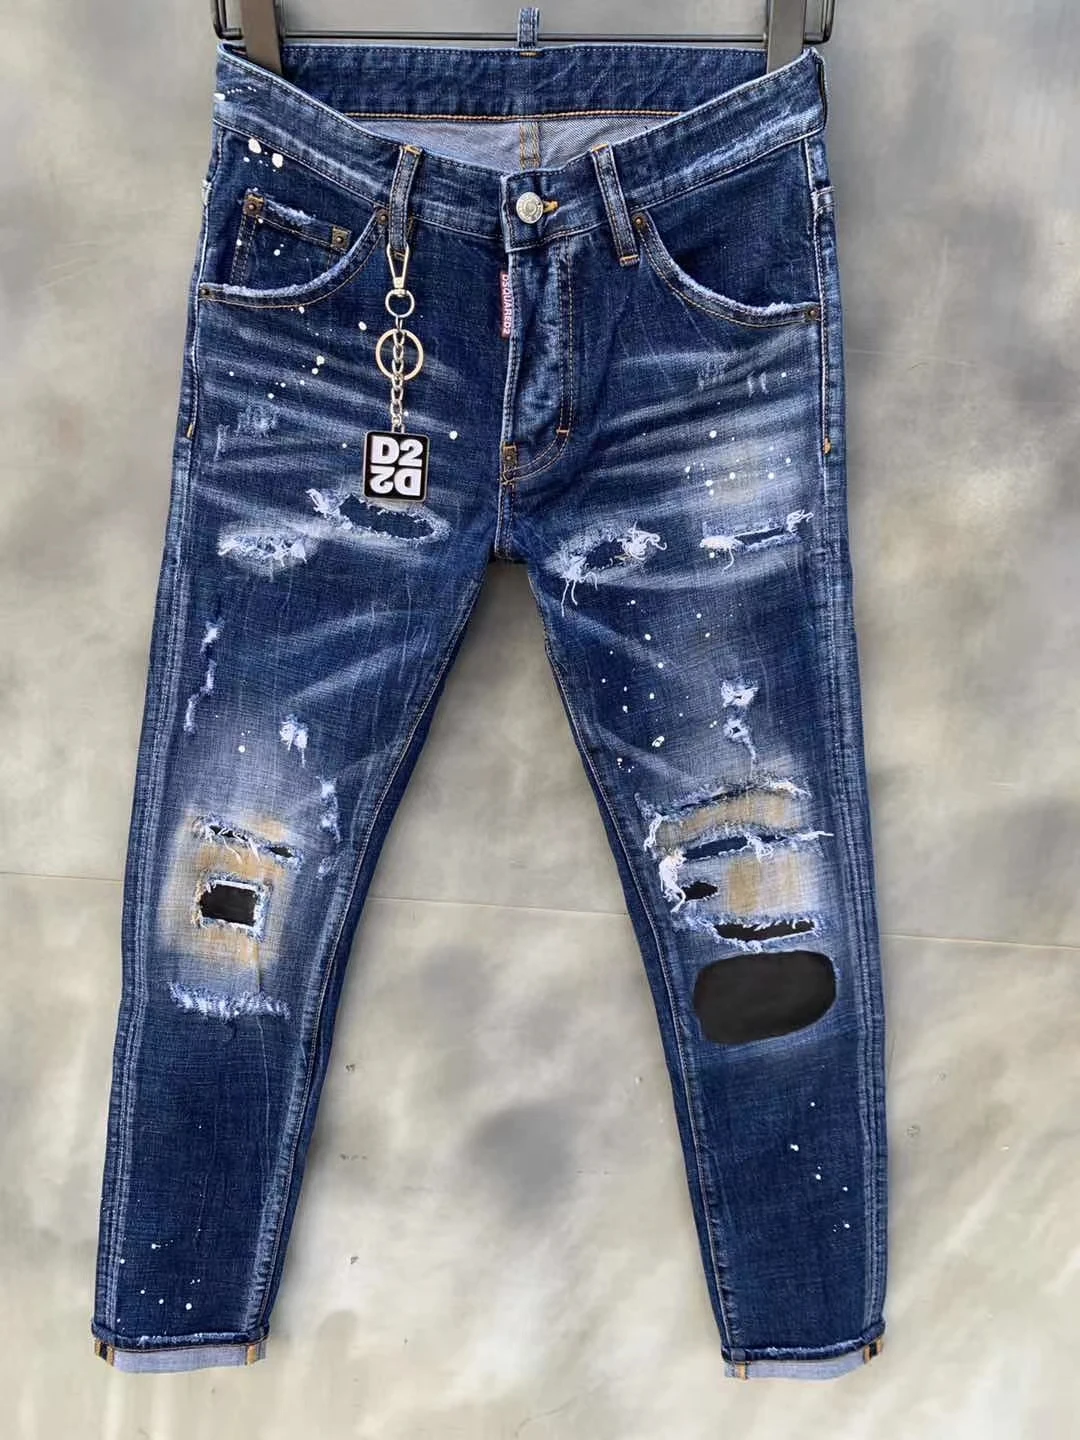 

New DSQUARED2 Men's/Women's Ripped Jeans, Fashion Washed Frayed Patch, Paint Made Old Stretch Pants